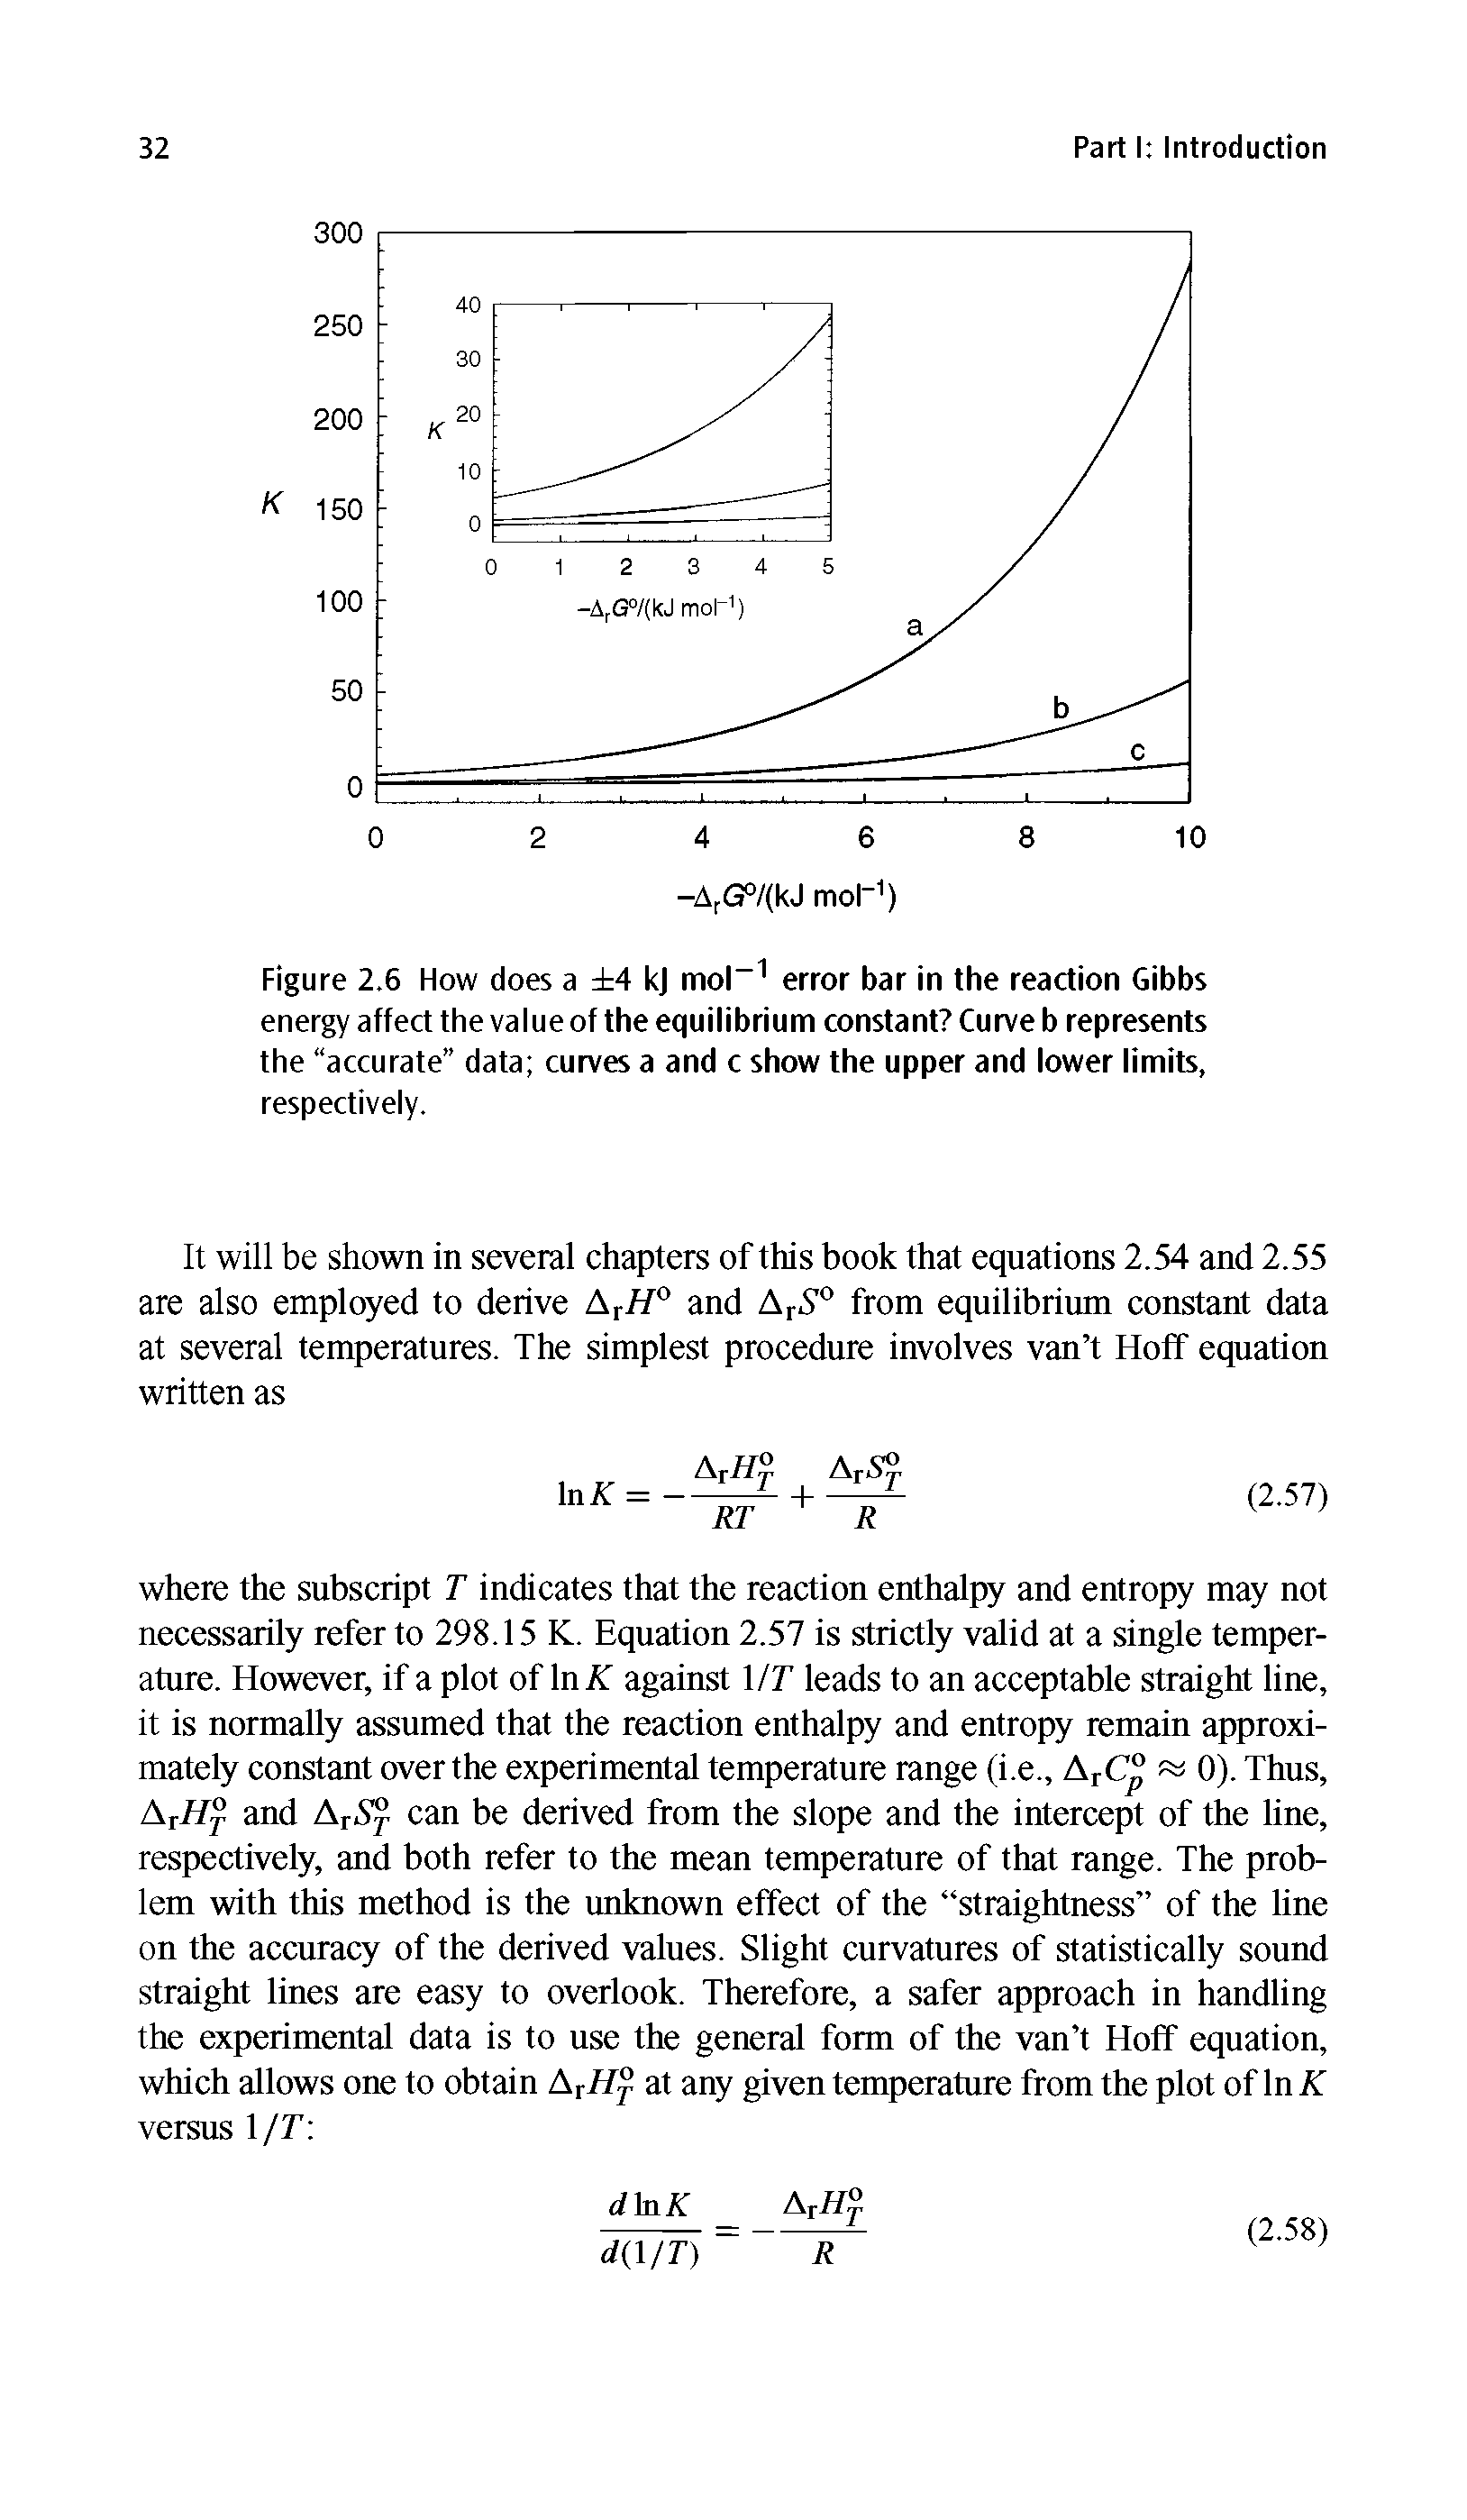 Figure 2.6 Flow does a 4 kj mol-1 error bar in the reaction Gibbs energy affect the value of the equilibrium constant Curve b represents the accurate data curves a and c show the upper and lower limits,...